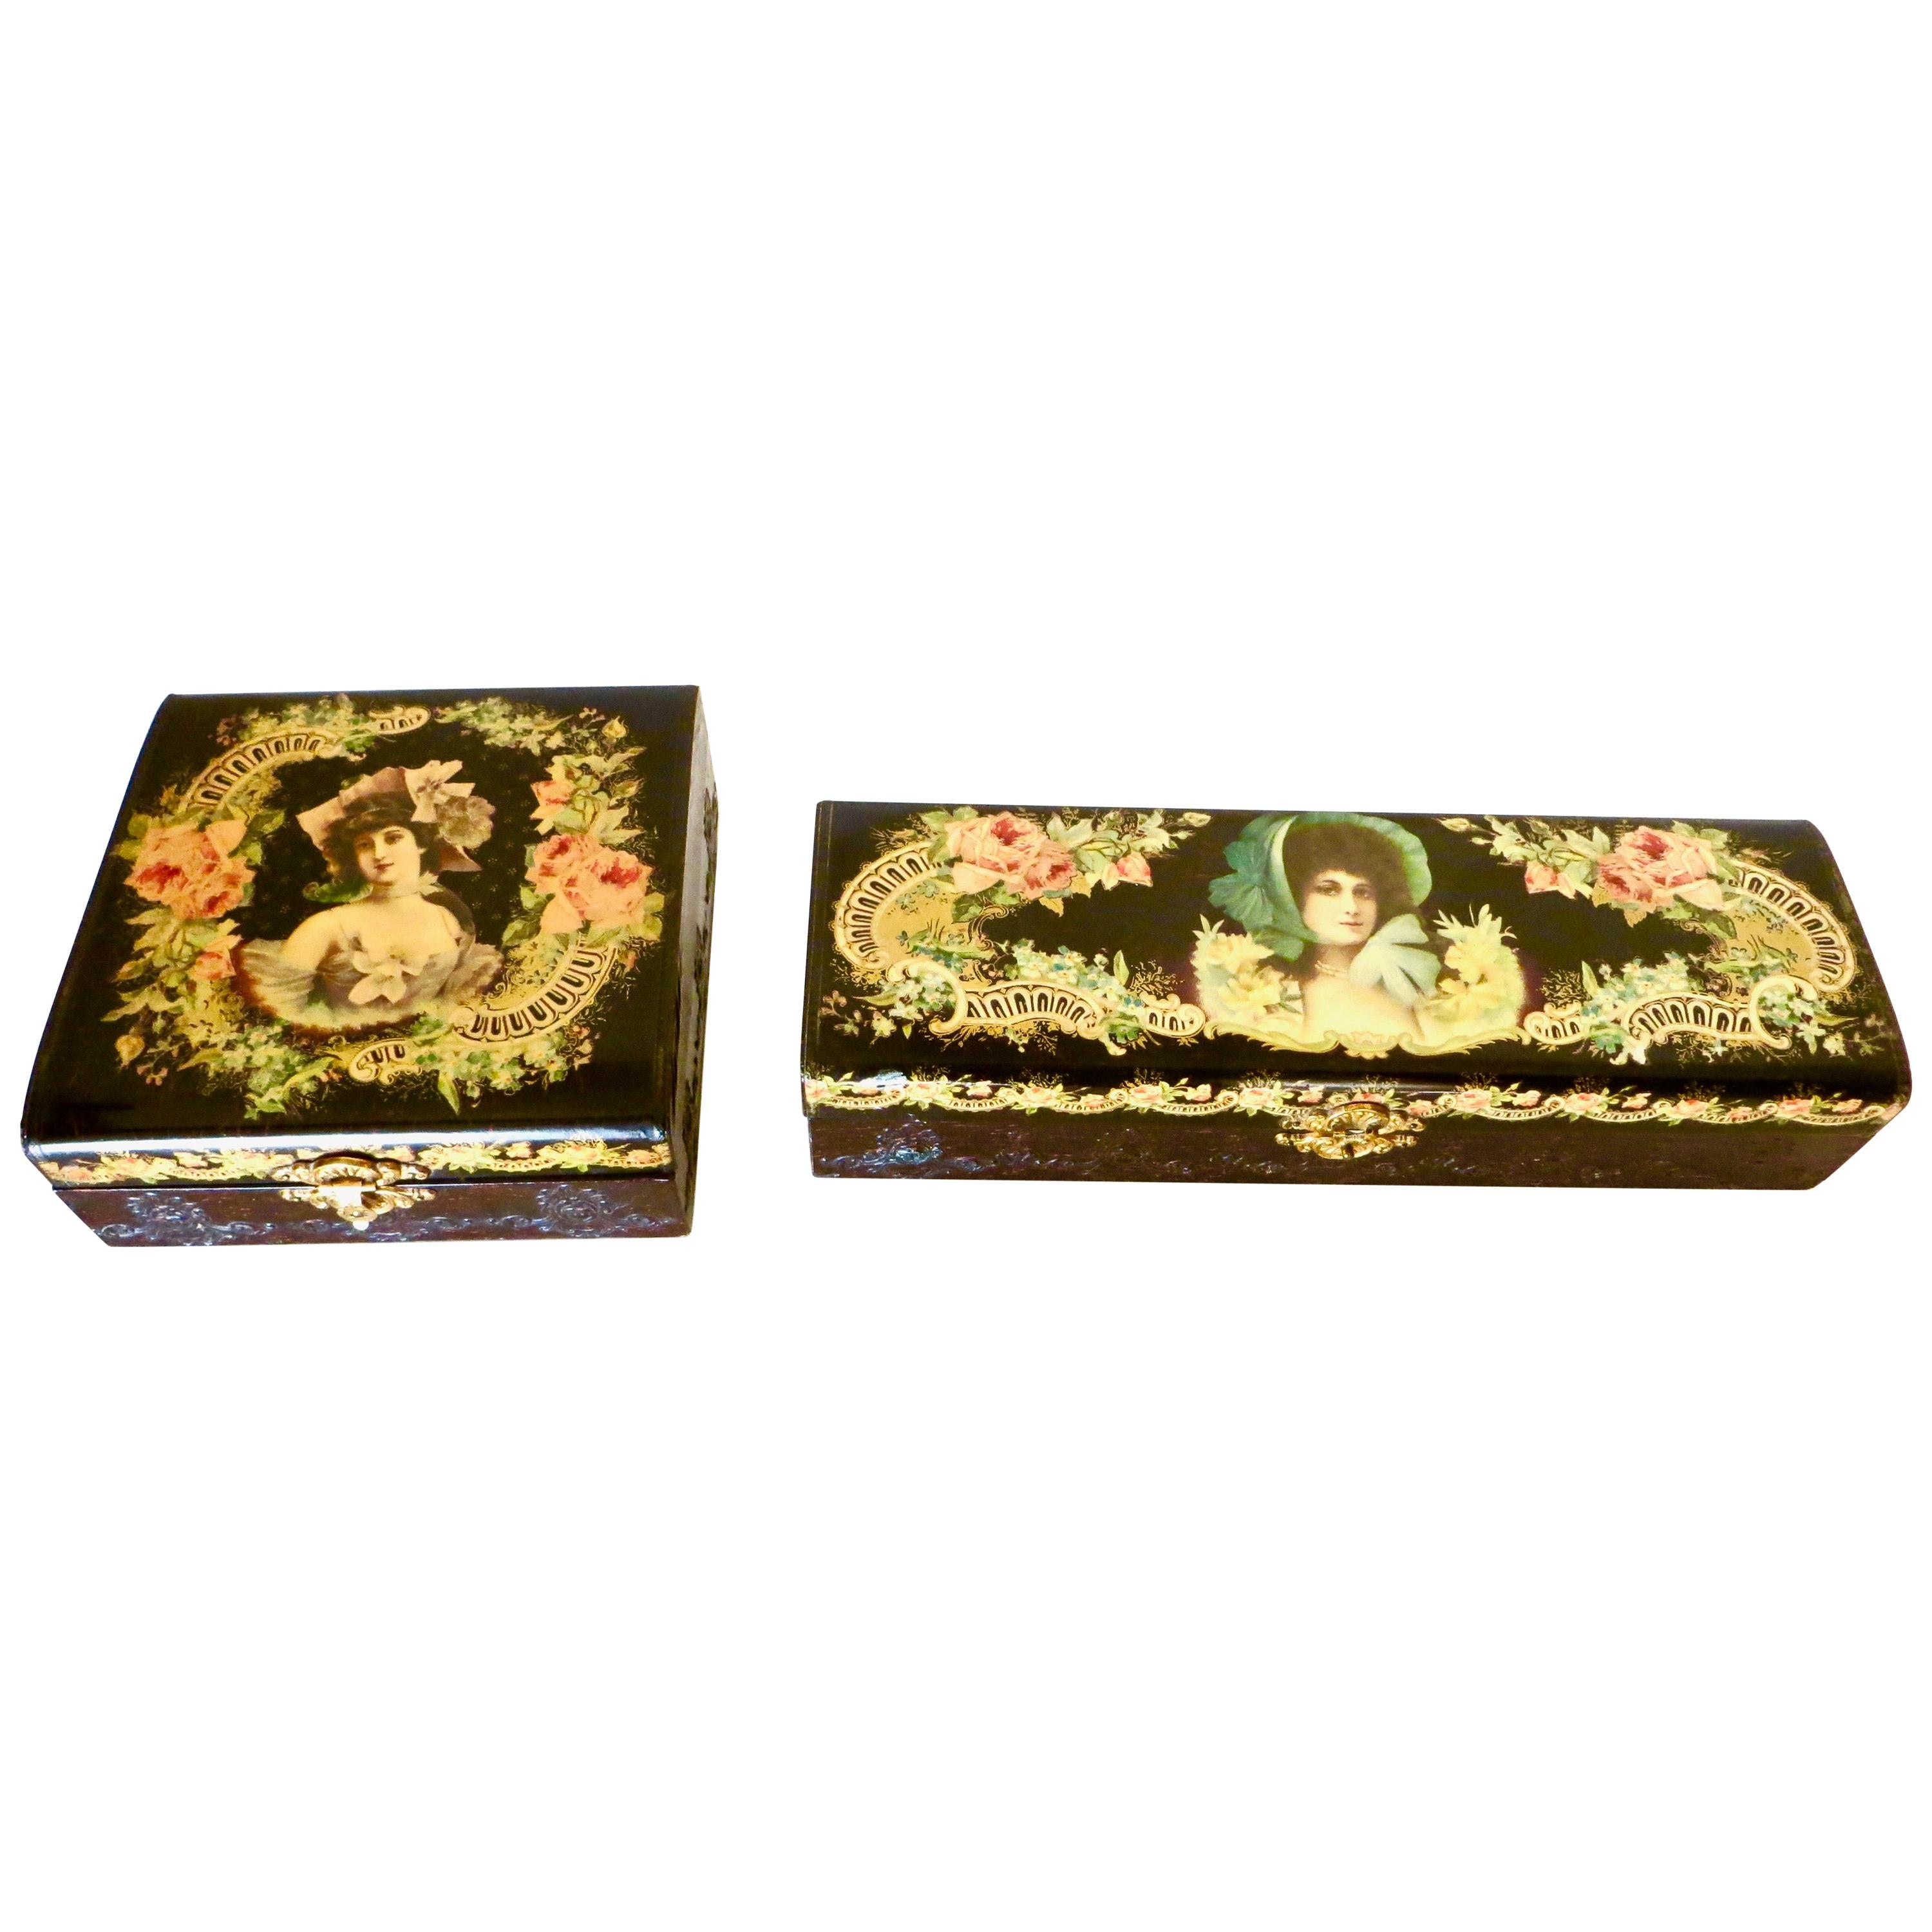 Two Matching Victorian Celluloid Boxes 'Jewelry Box & Glove Box', circa 1890